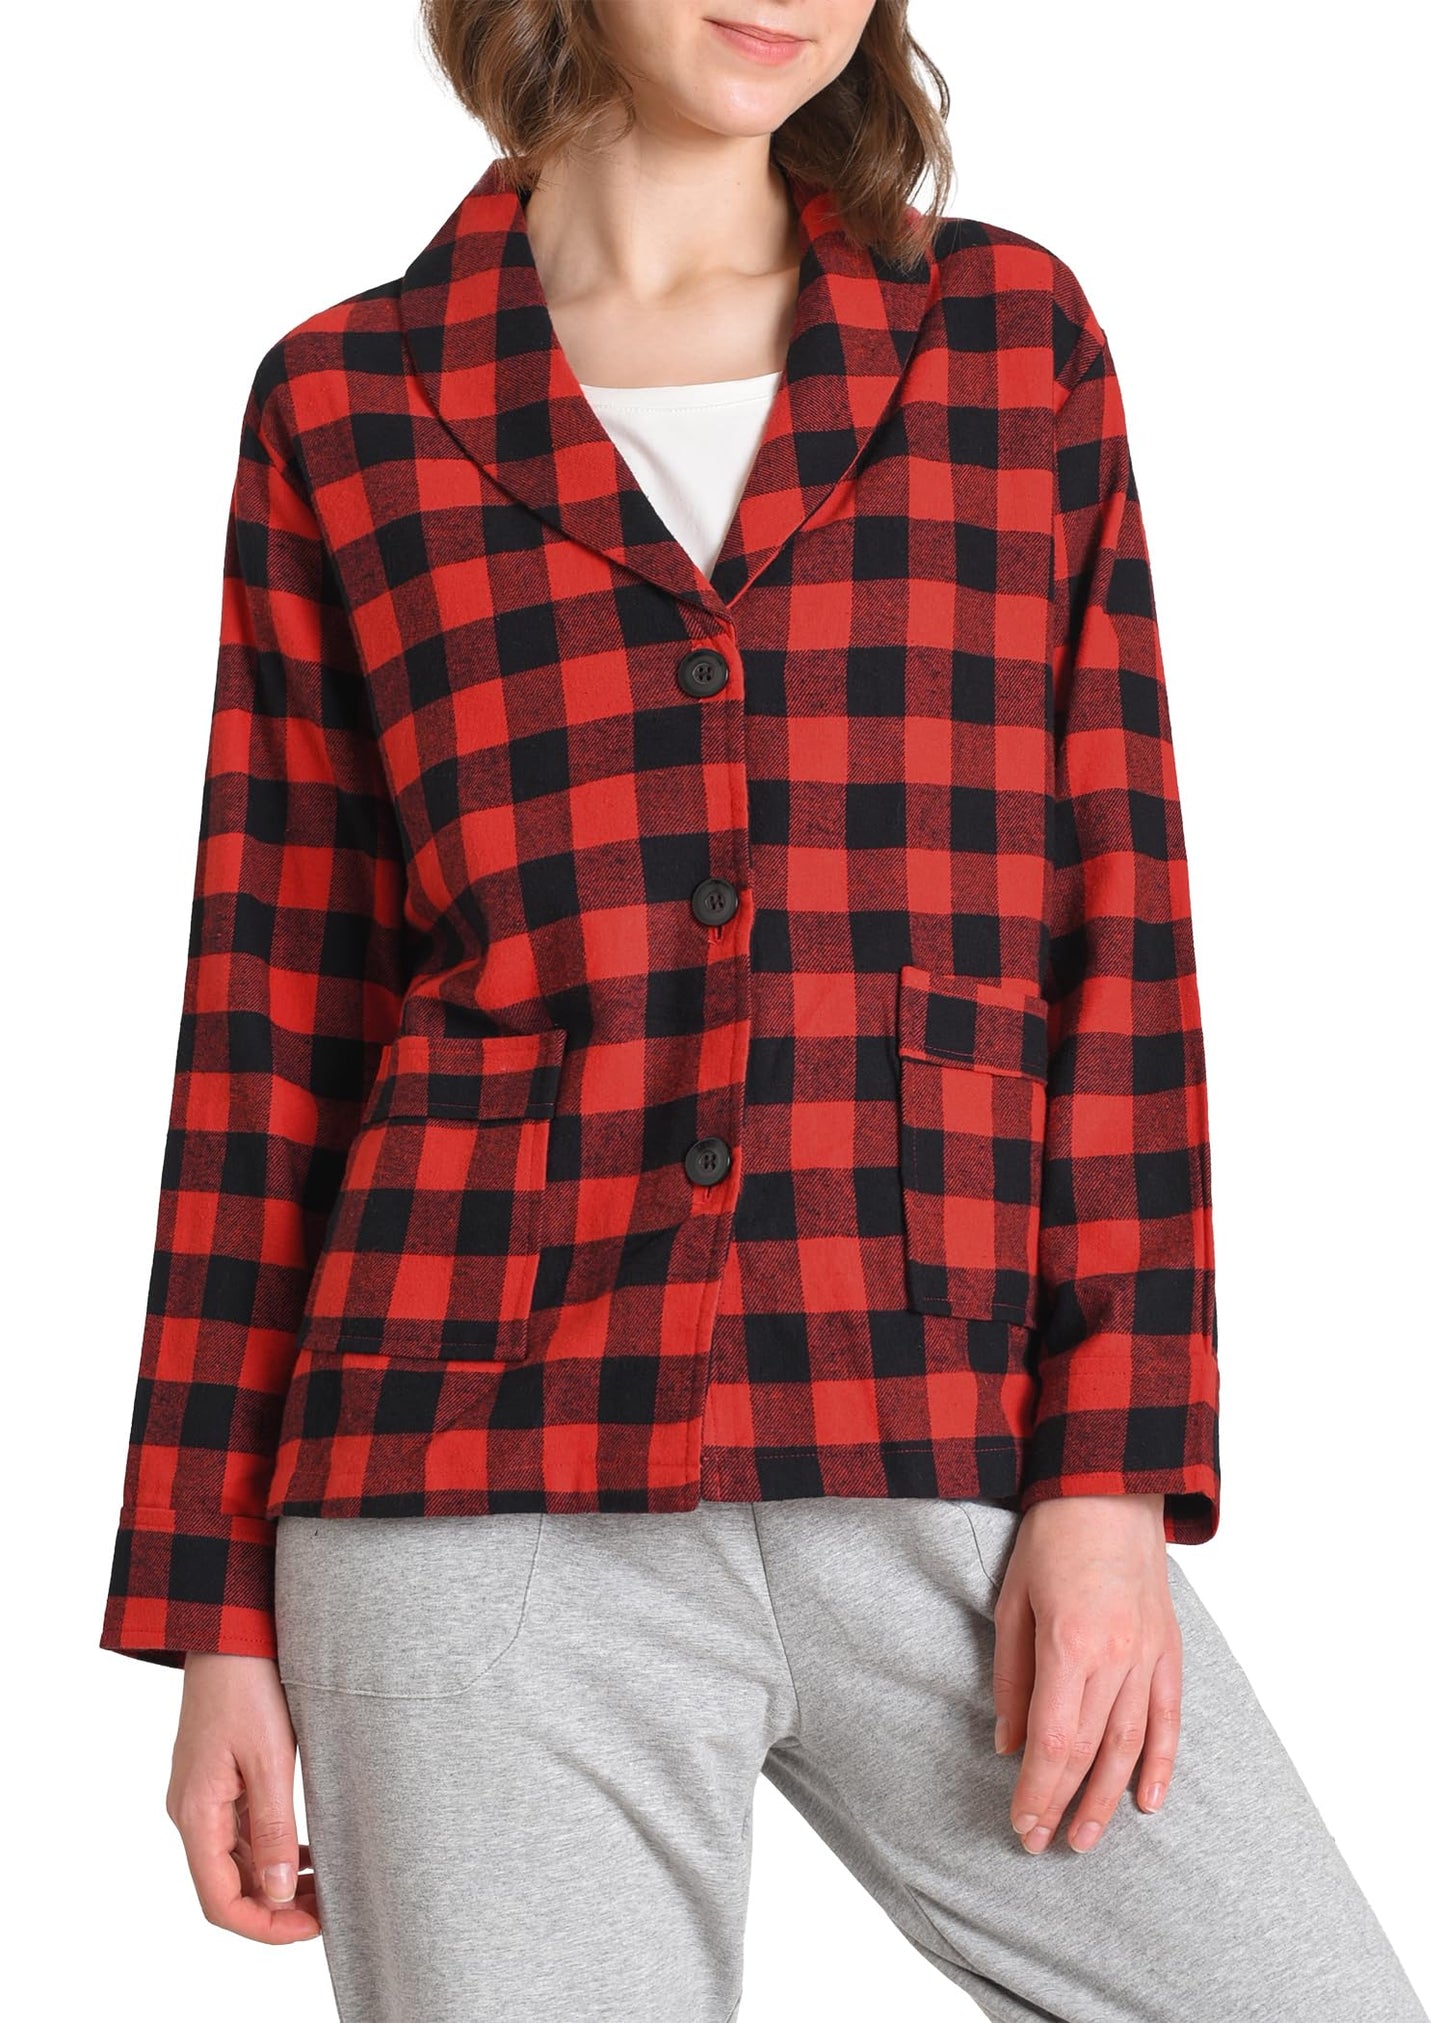 Women's Cotton Flannel Bed Jacket with Pockets- Latuza